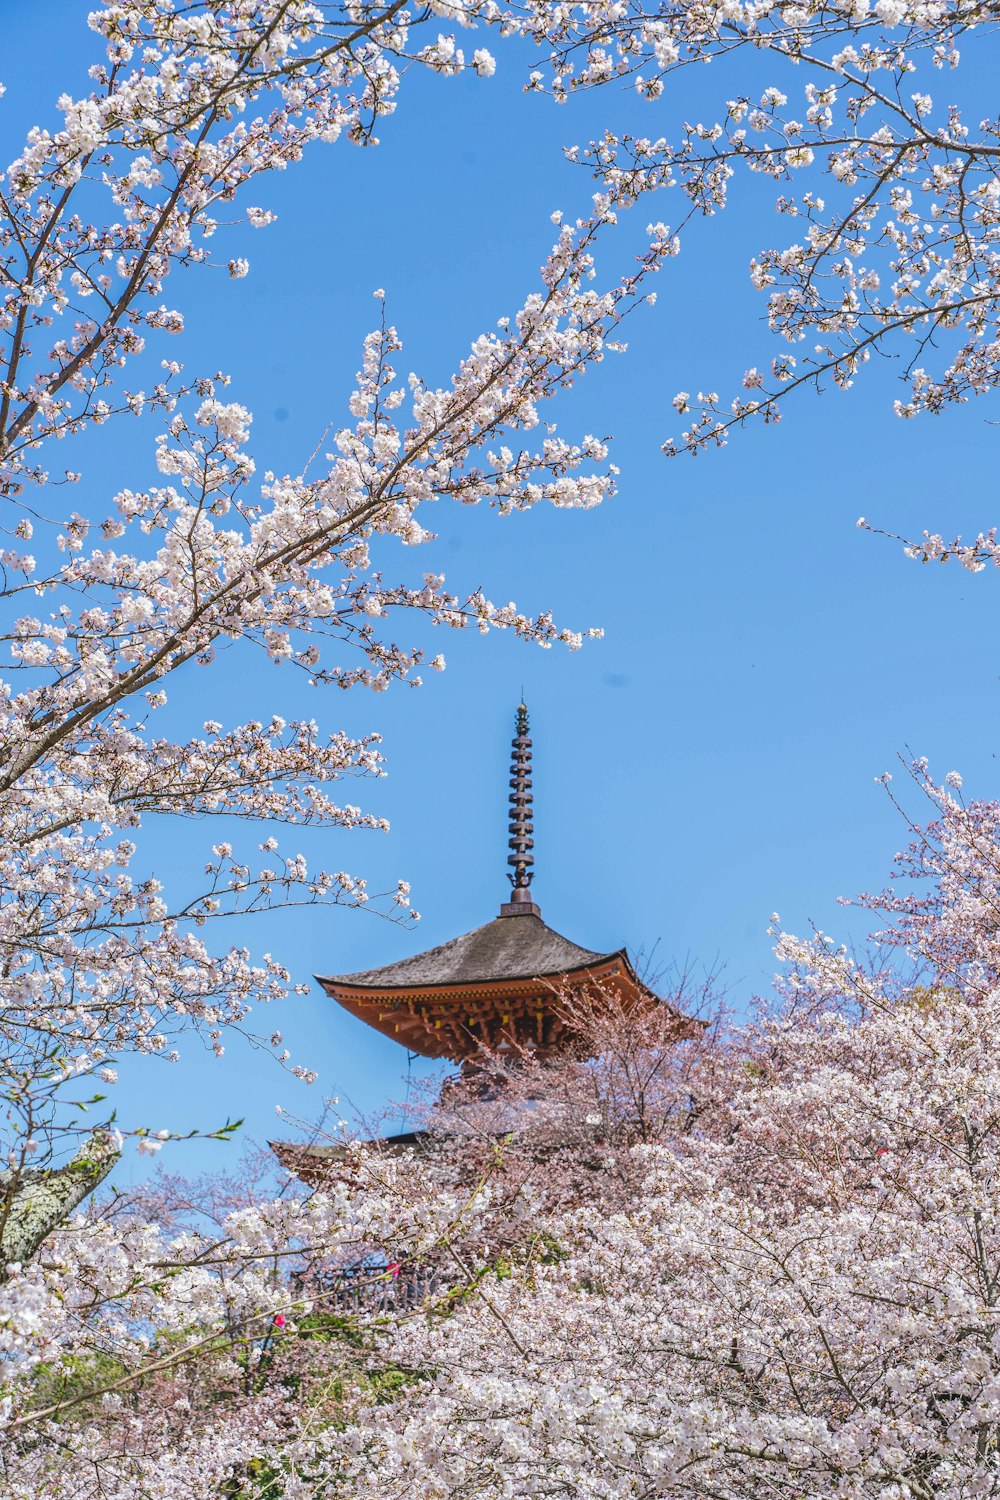 a pagoda with cherry blossoms on the trees